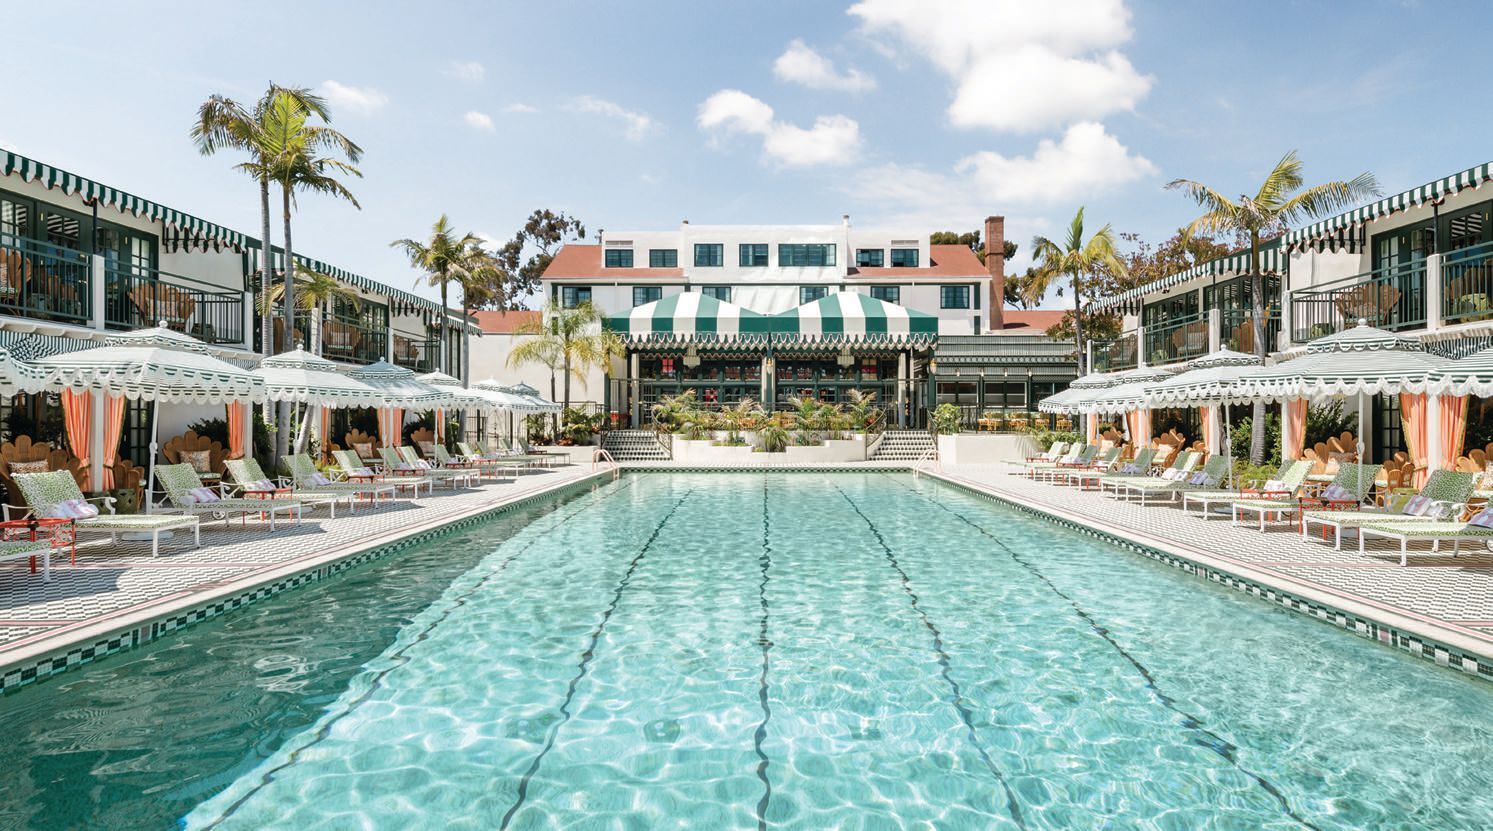 The Lafayette Hotel & Swim Club’s picturesque pool deck POOL PHOTO BY HALEY HILL PHOTOGRAPHY